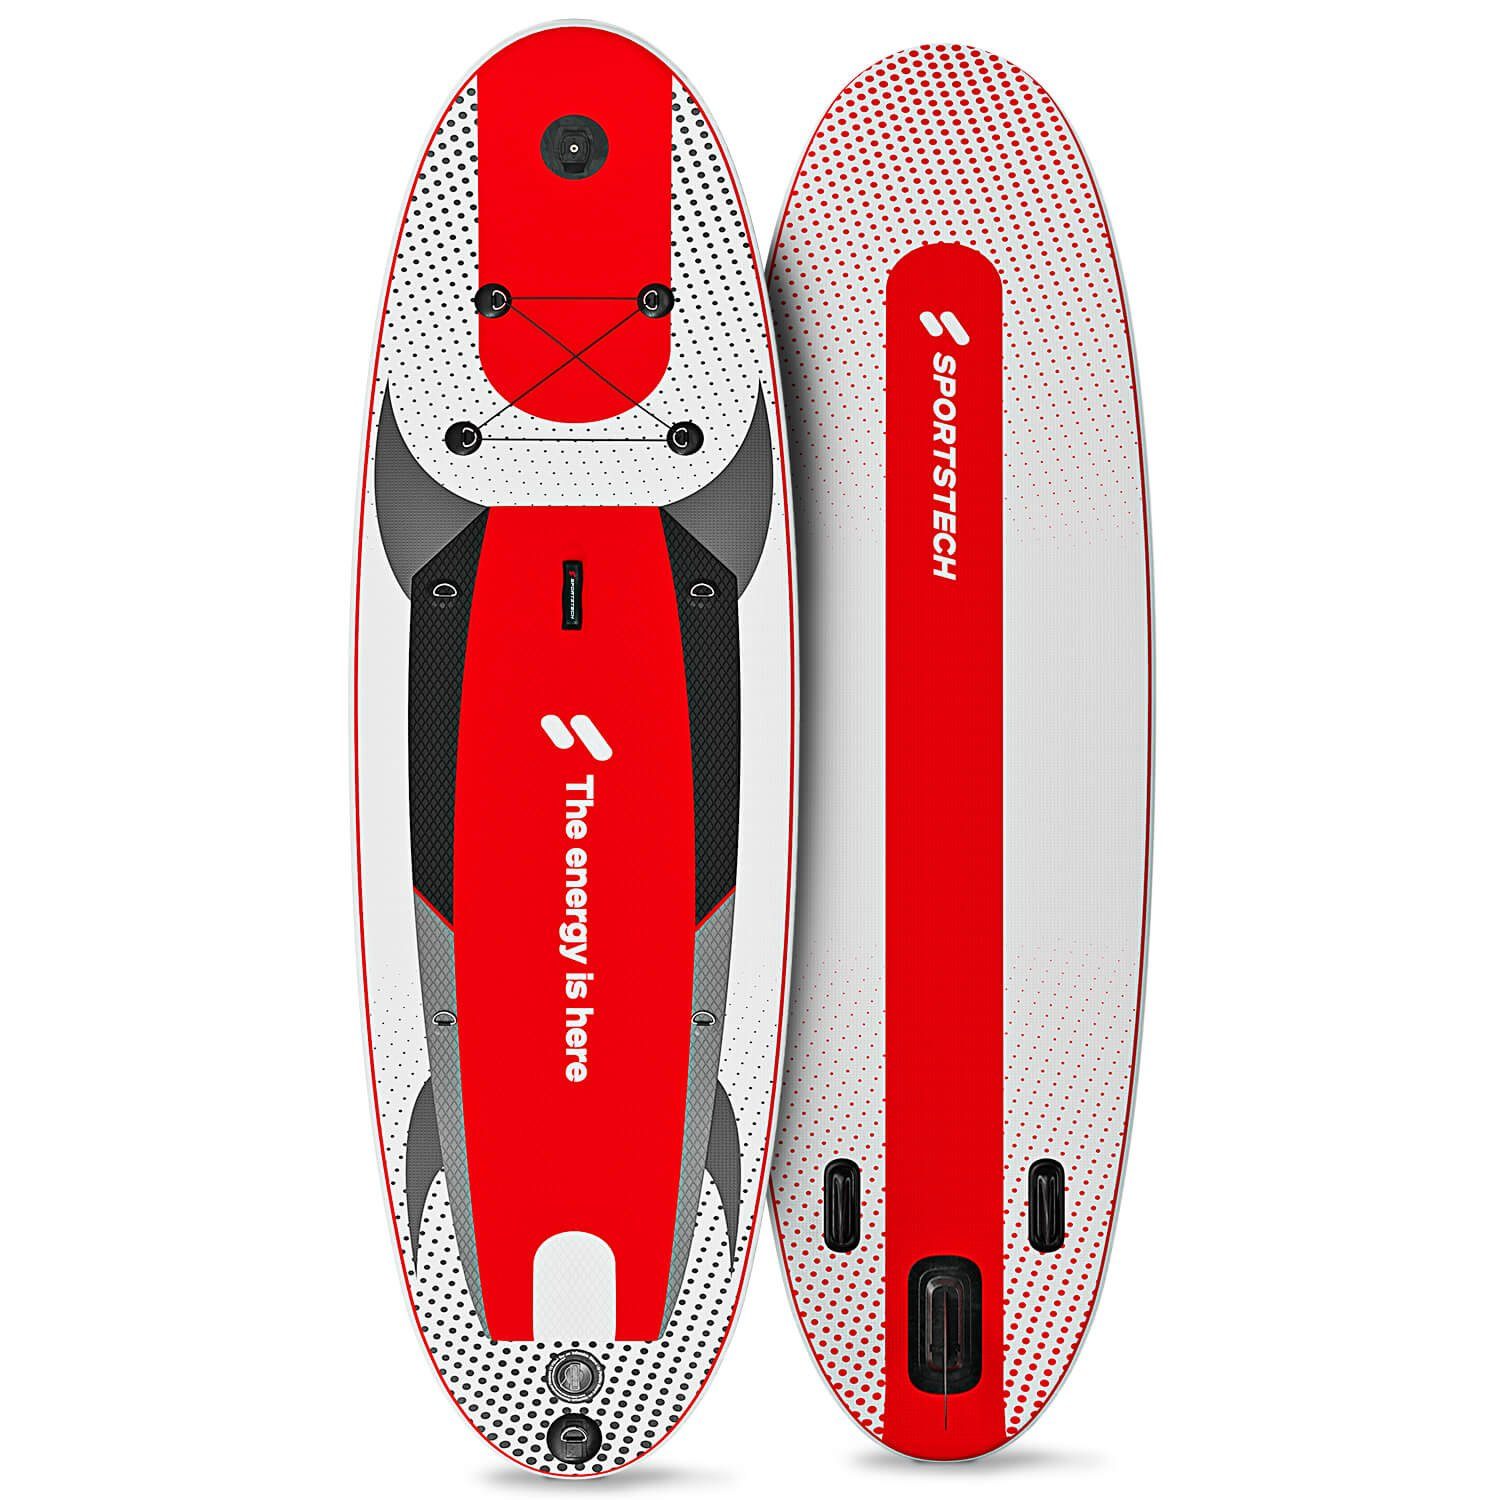 Sportstech SUP-Board »WPB320«, Premium Stand Up Paddling Board